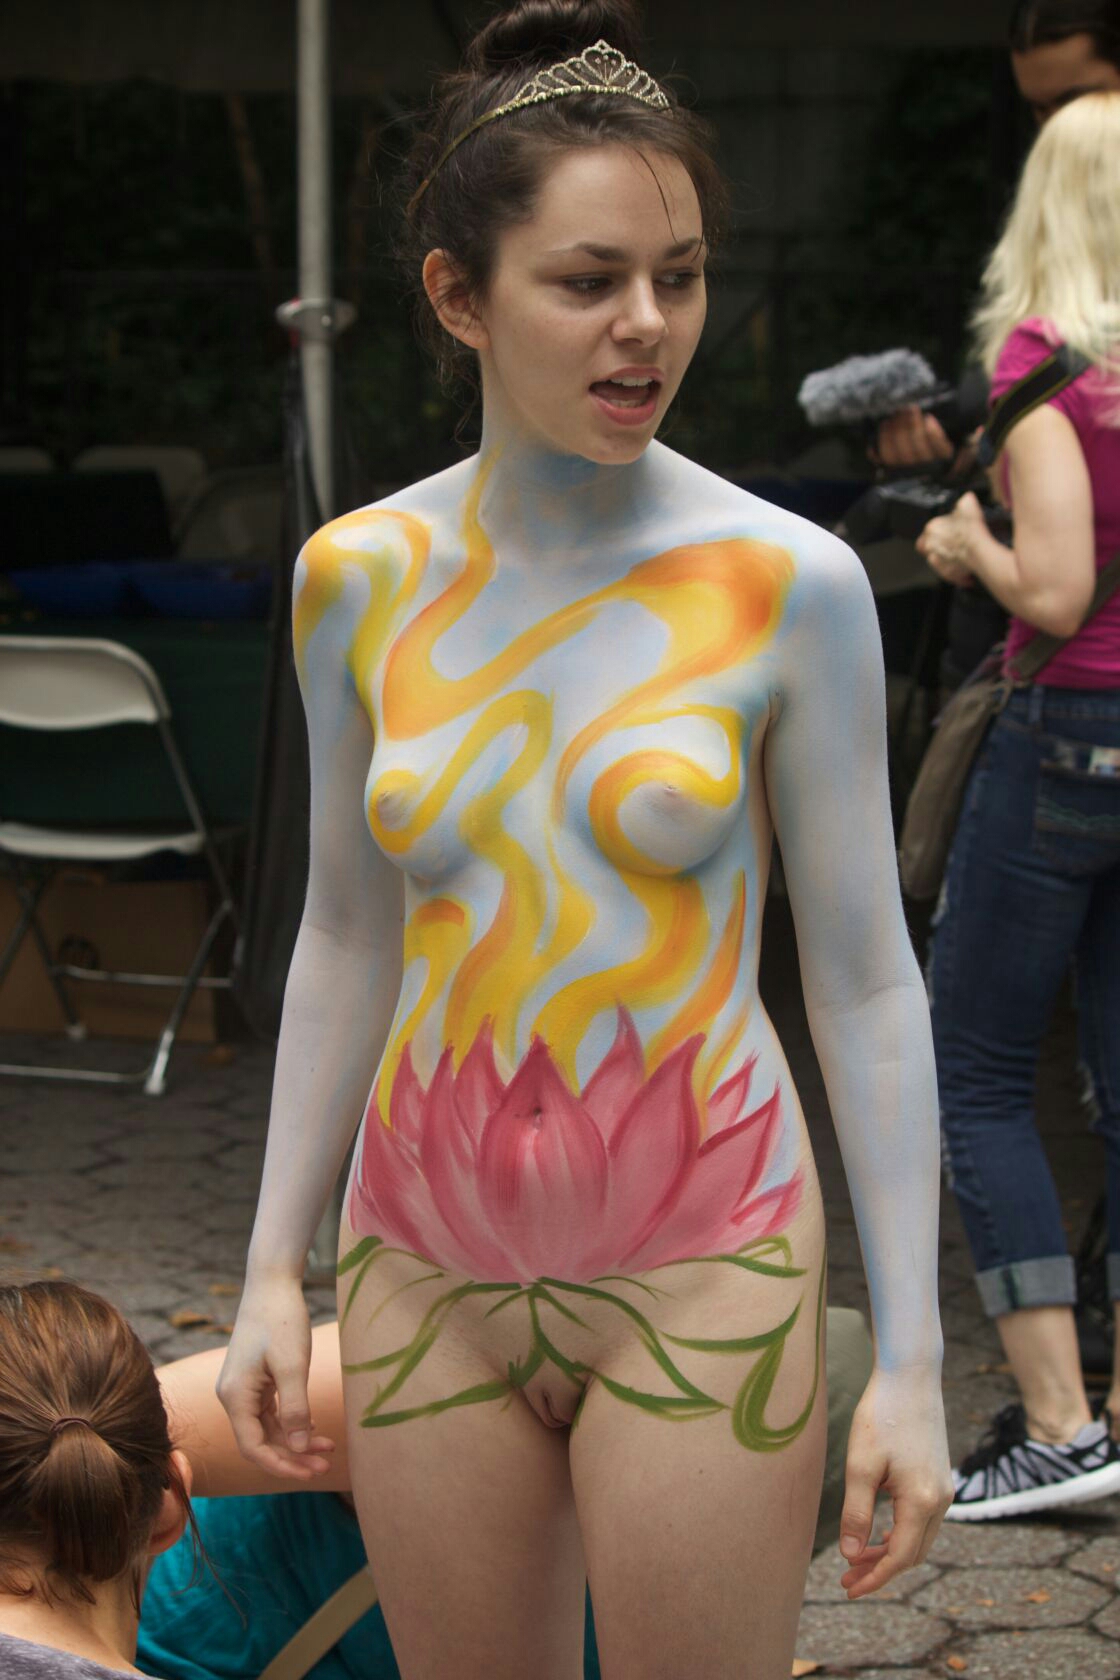 Naked body painting